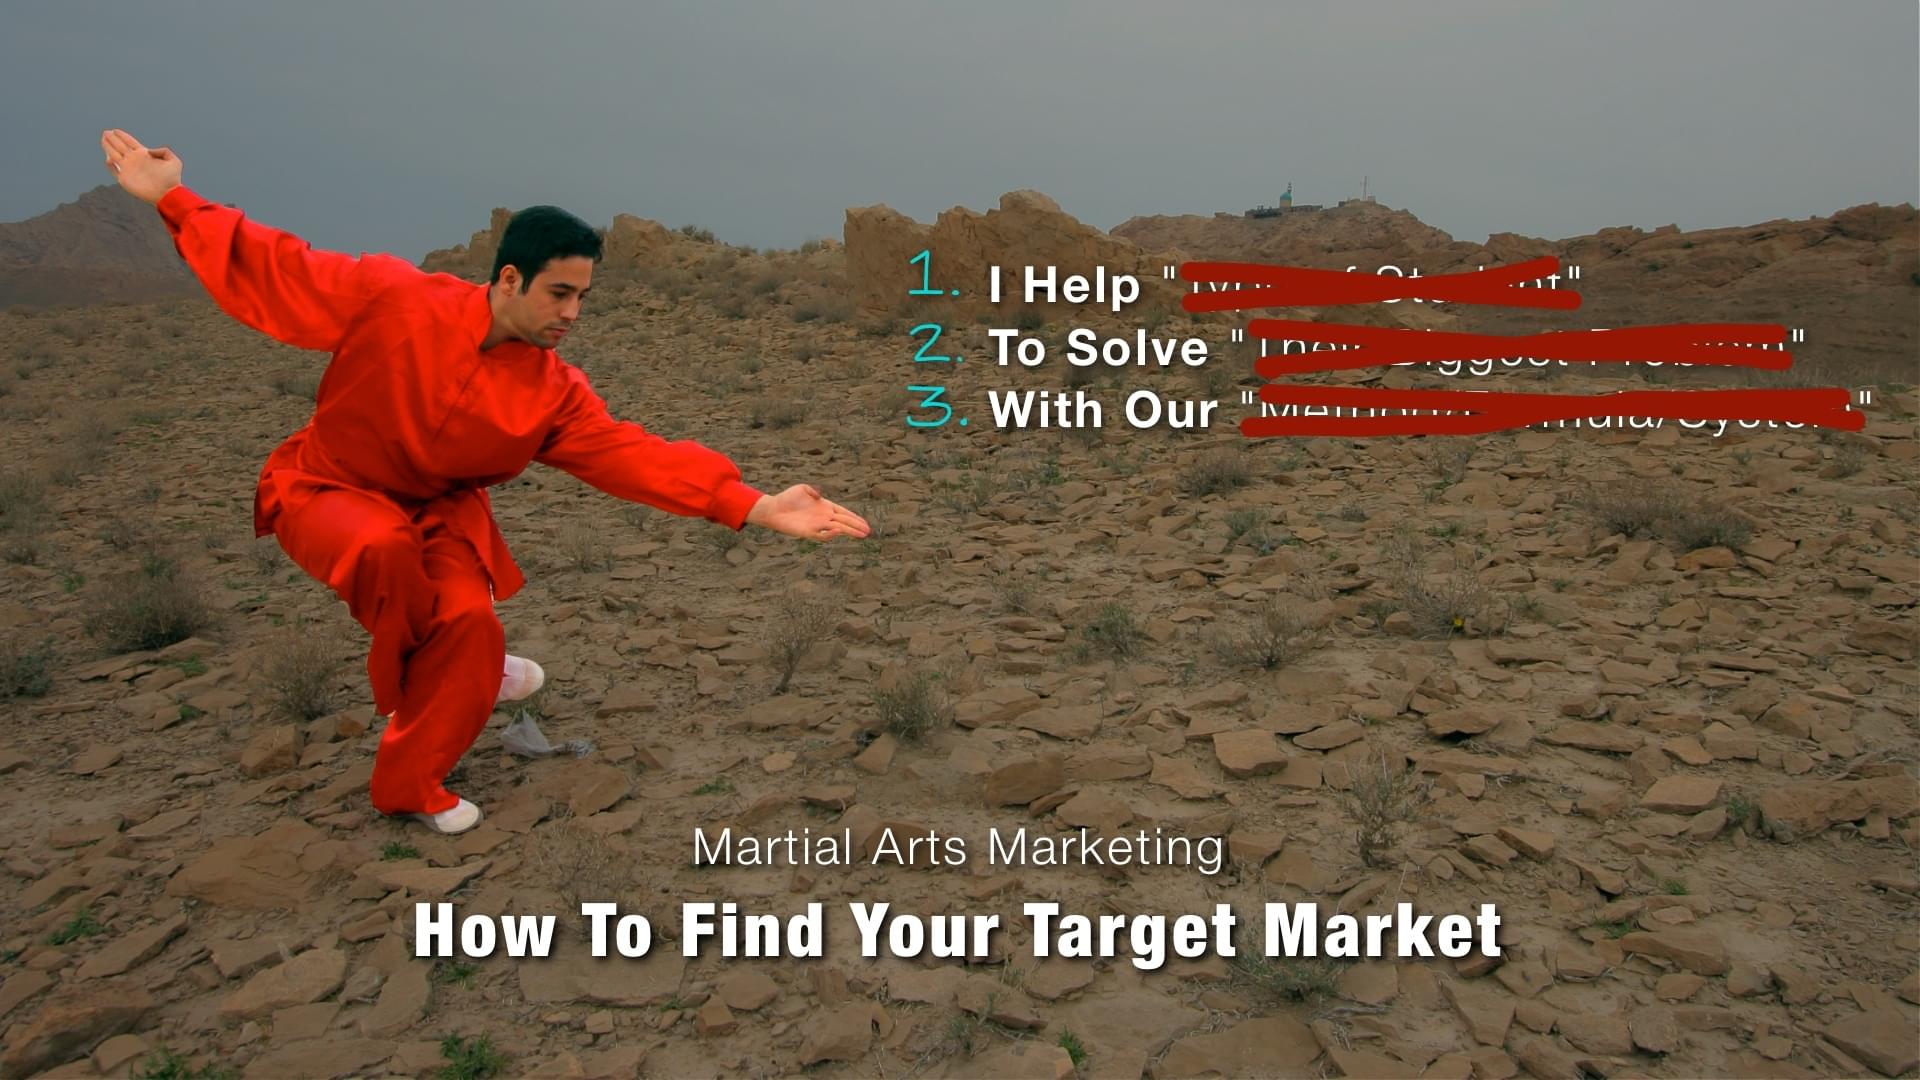 How to find your target market in martial arts marketing